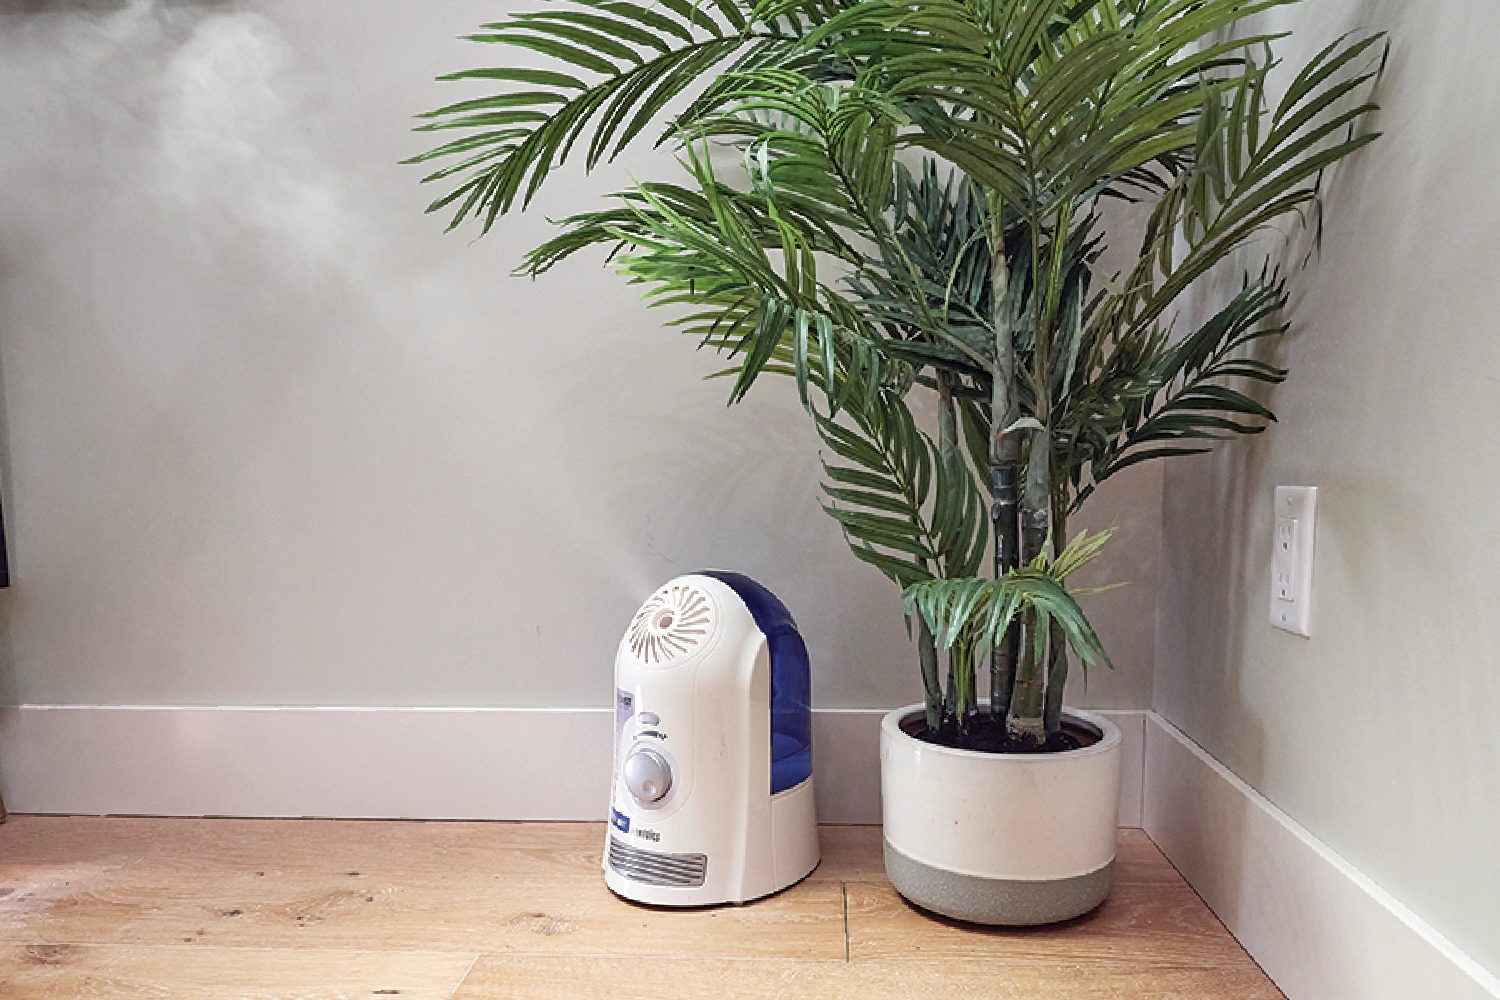 How to Clean a Humidifier